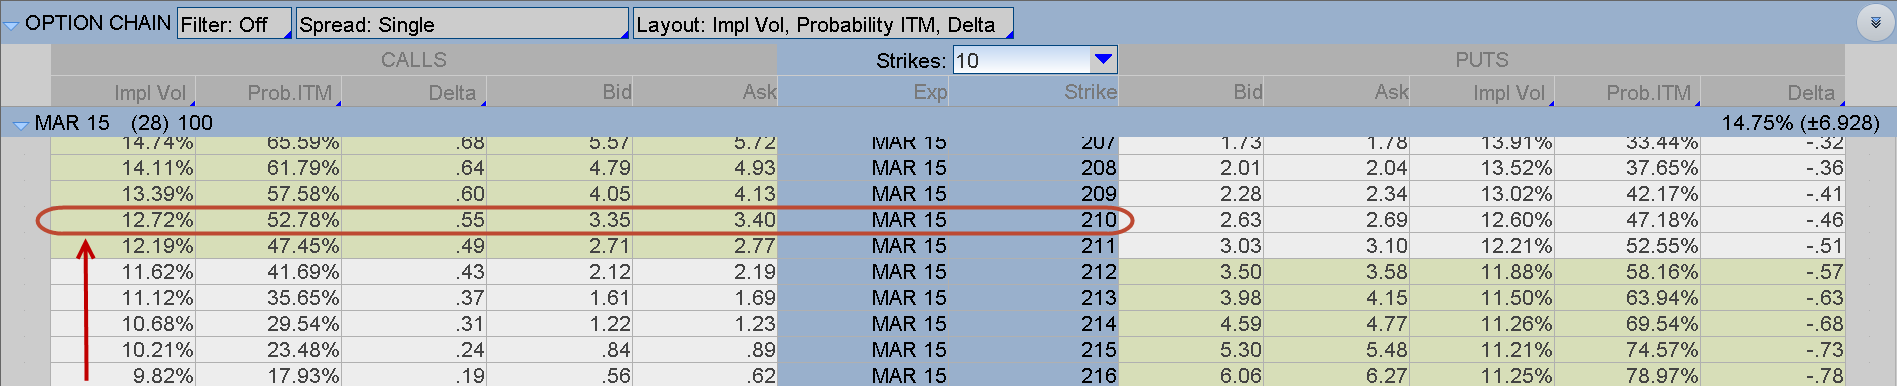 Implied volatility at normal levels